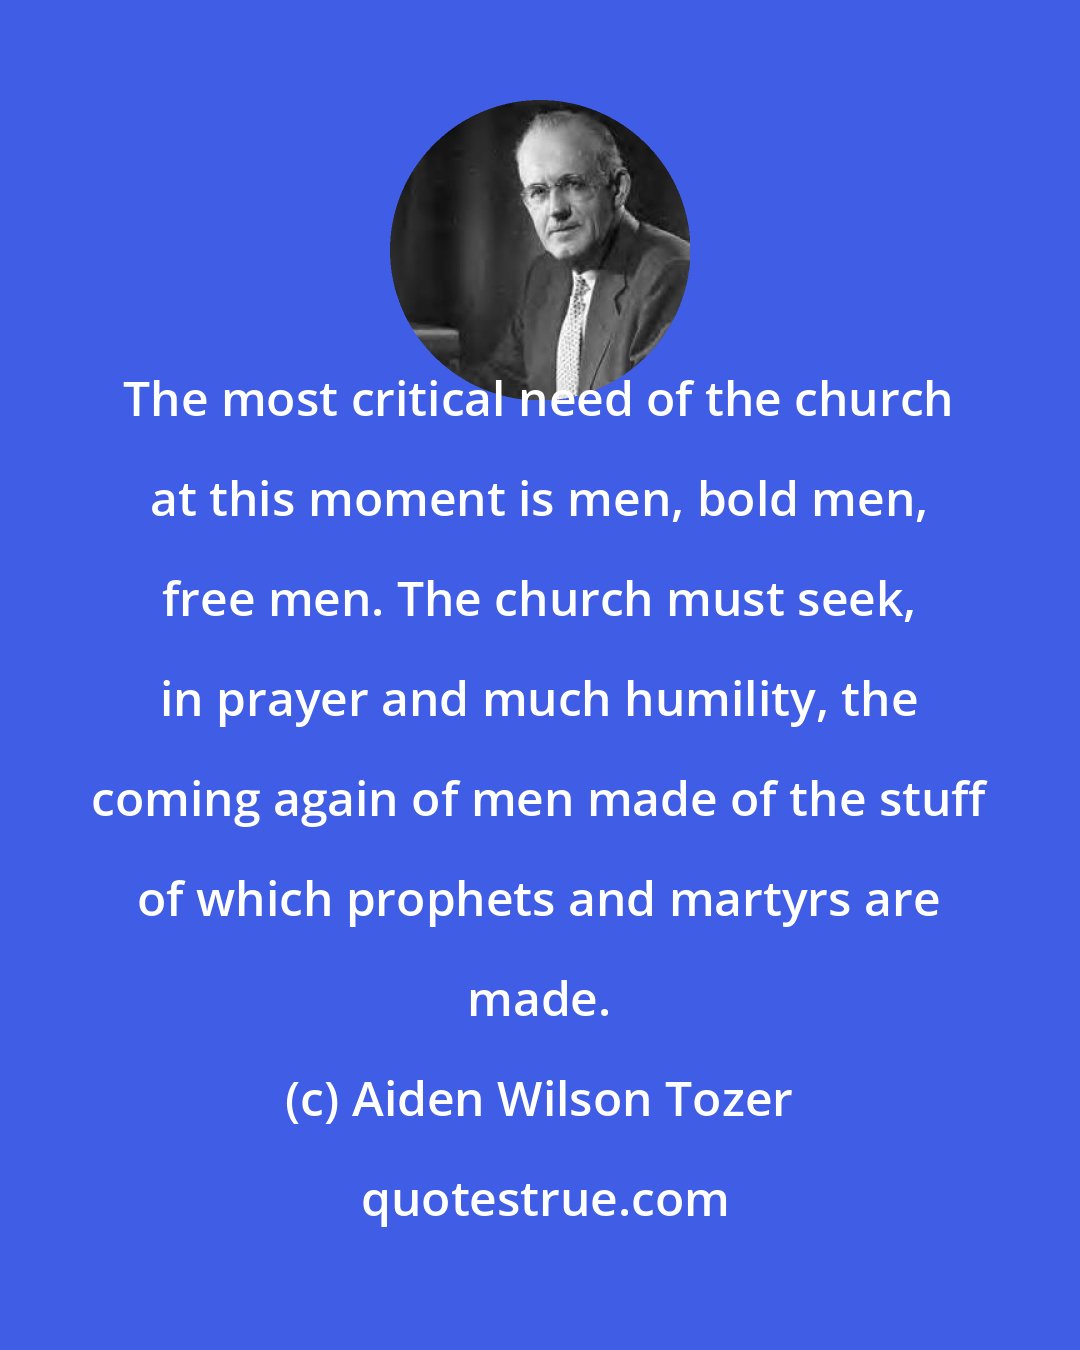 Aiden Wilson Tozer: The most critical need of the church at this moment is men, bold men, free men. The church must seek, in prayer and much humility, the coming again of men made of the stuff of which prophets and martyrs are made.